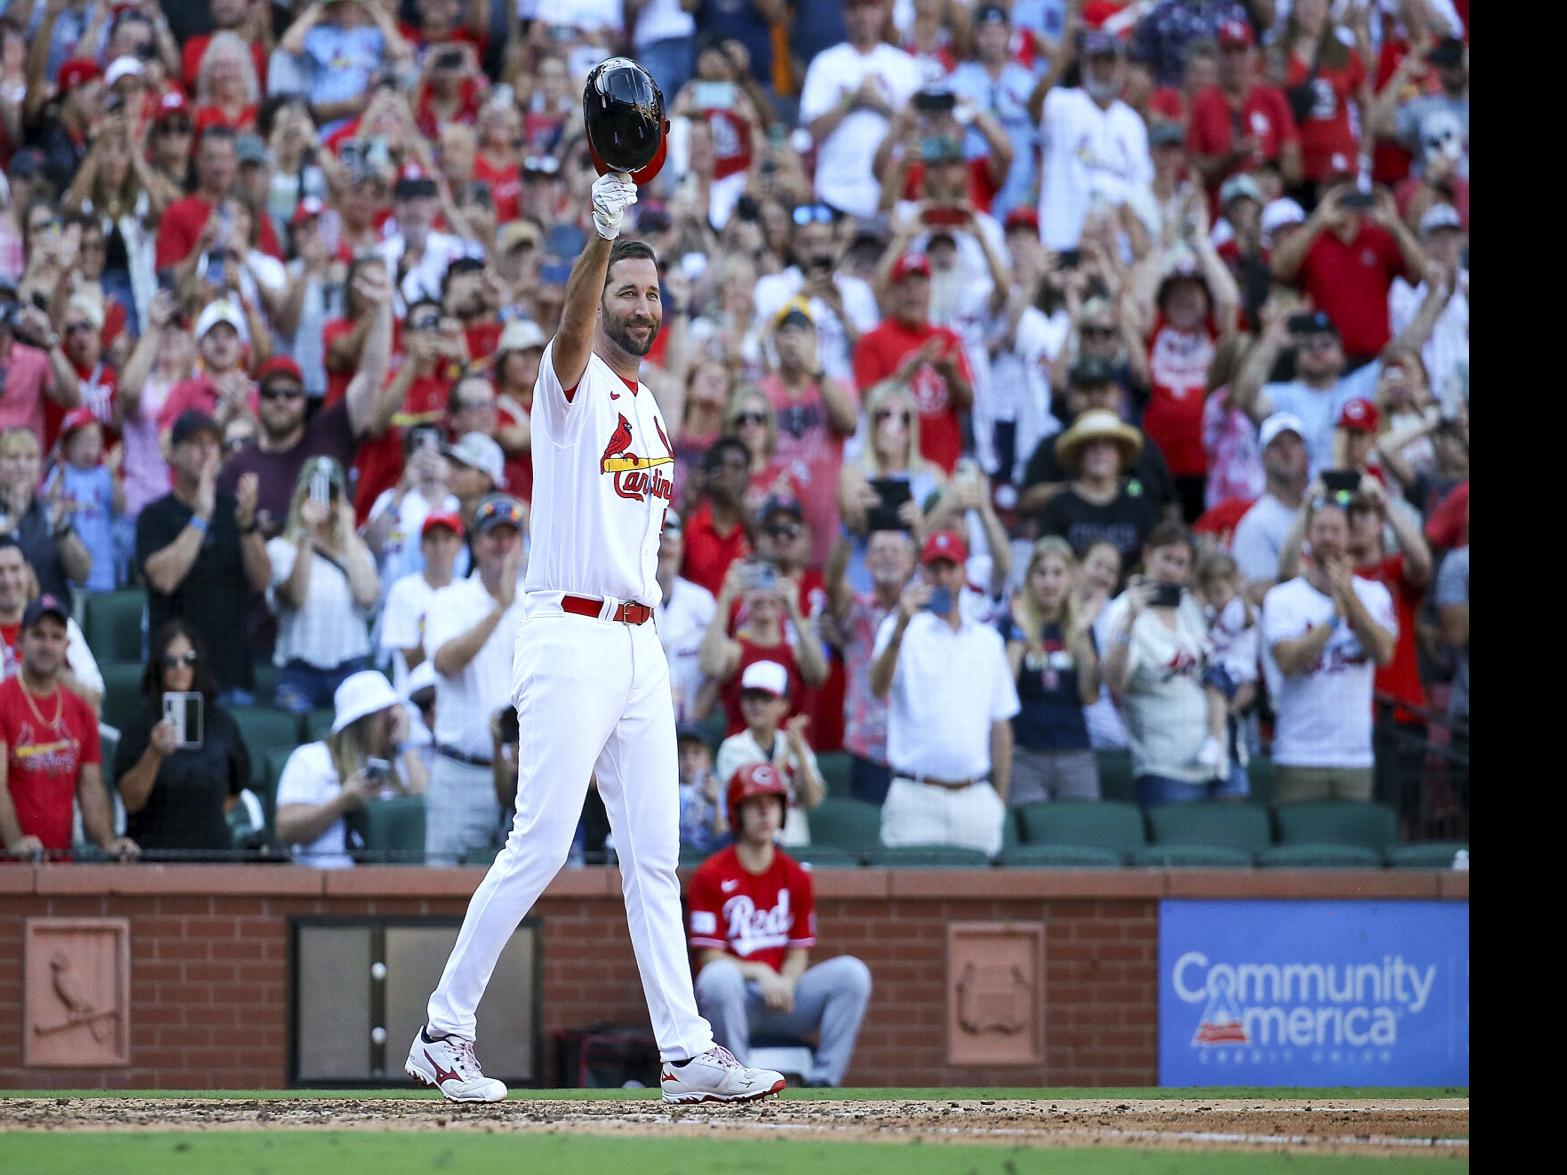 Wainwright strikes out in cameo to end career as Cardinals beat Reds 4-3, Pro Sports